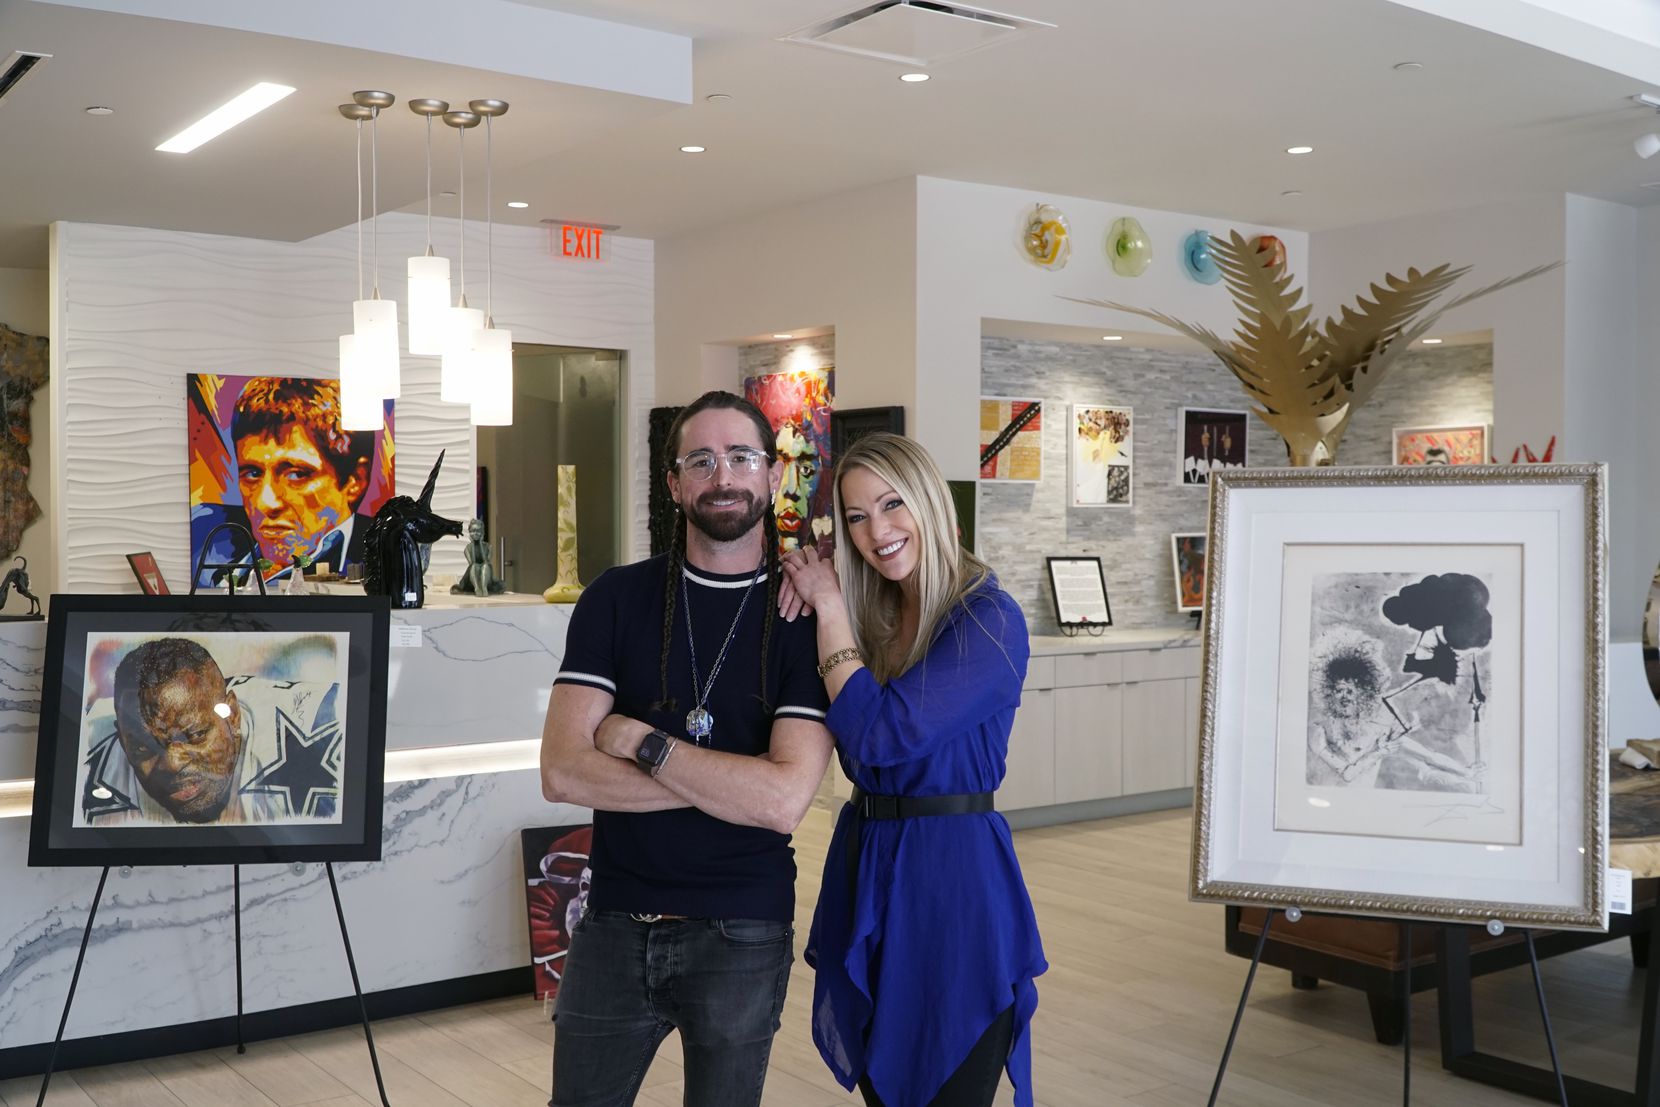 Travis McCann and Shannon McAnally curated the recent exhibition in Plano. Their own works were displayed along with art by survivors of human trafficking.